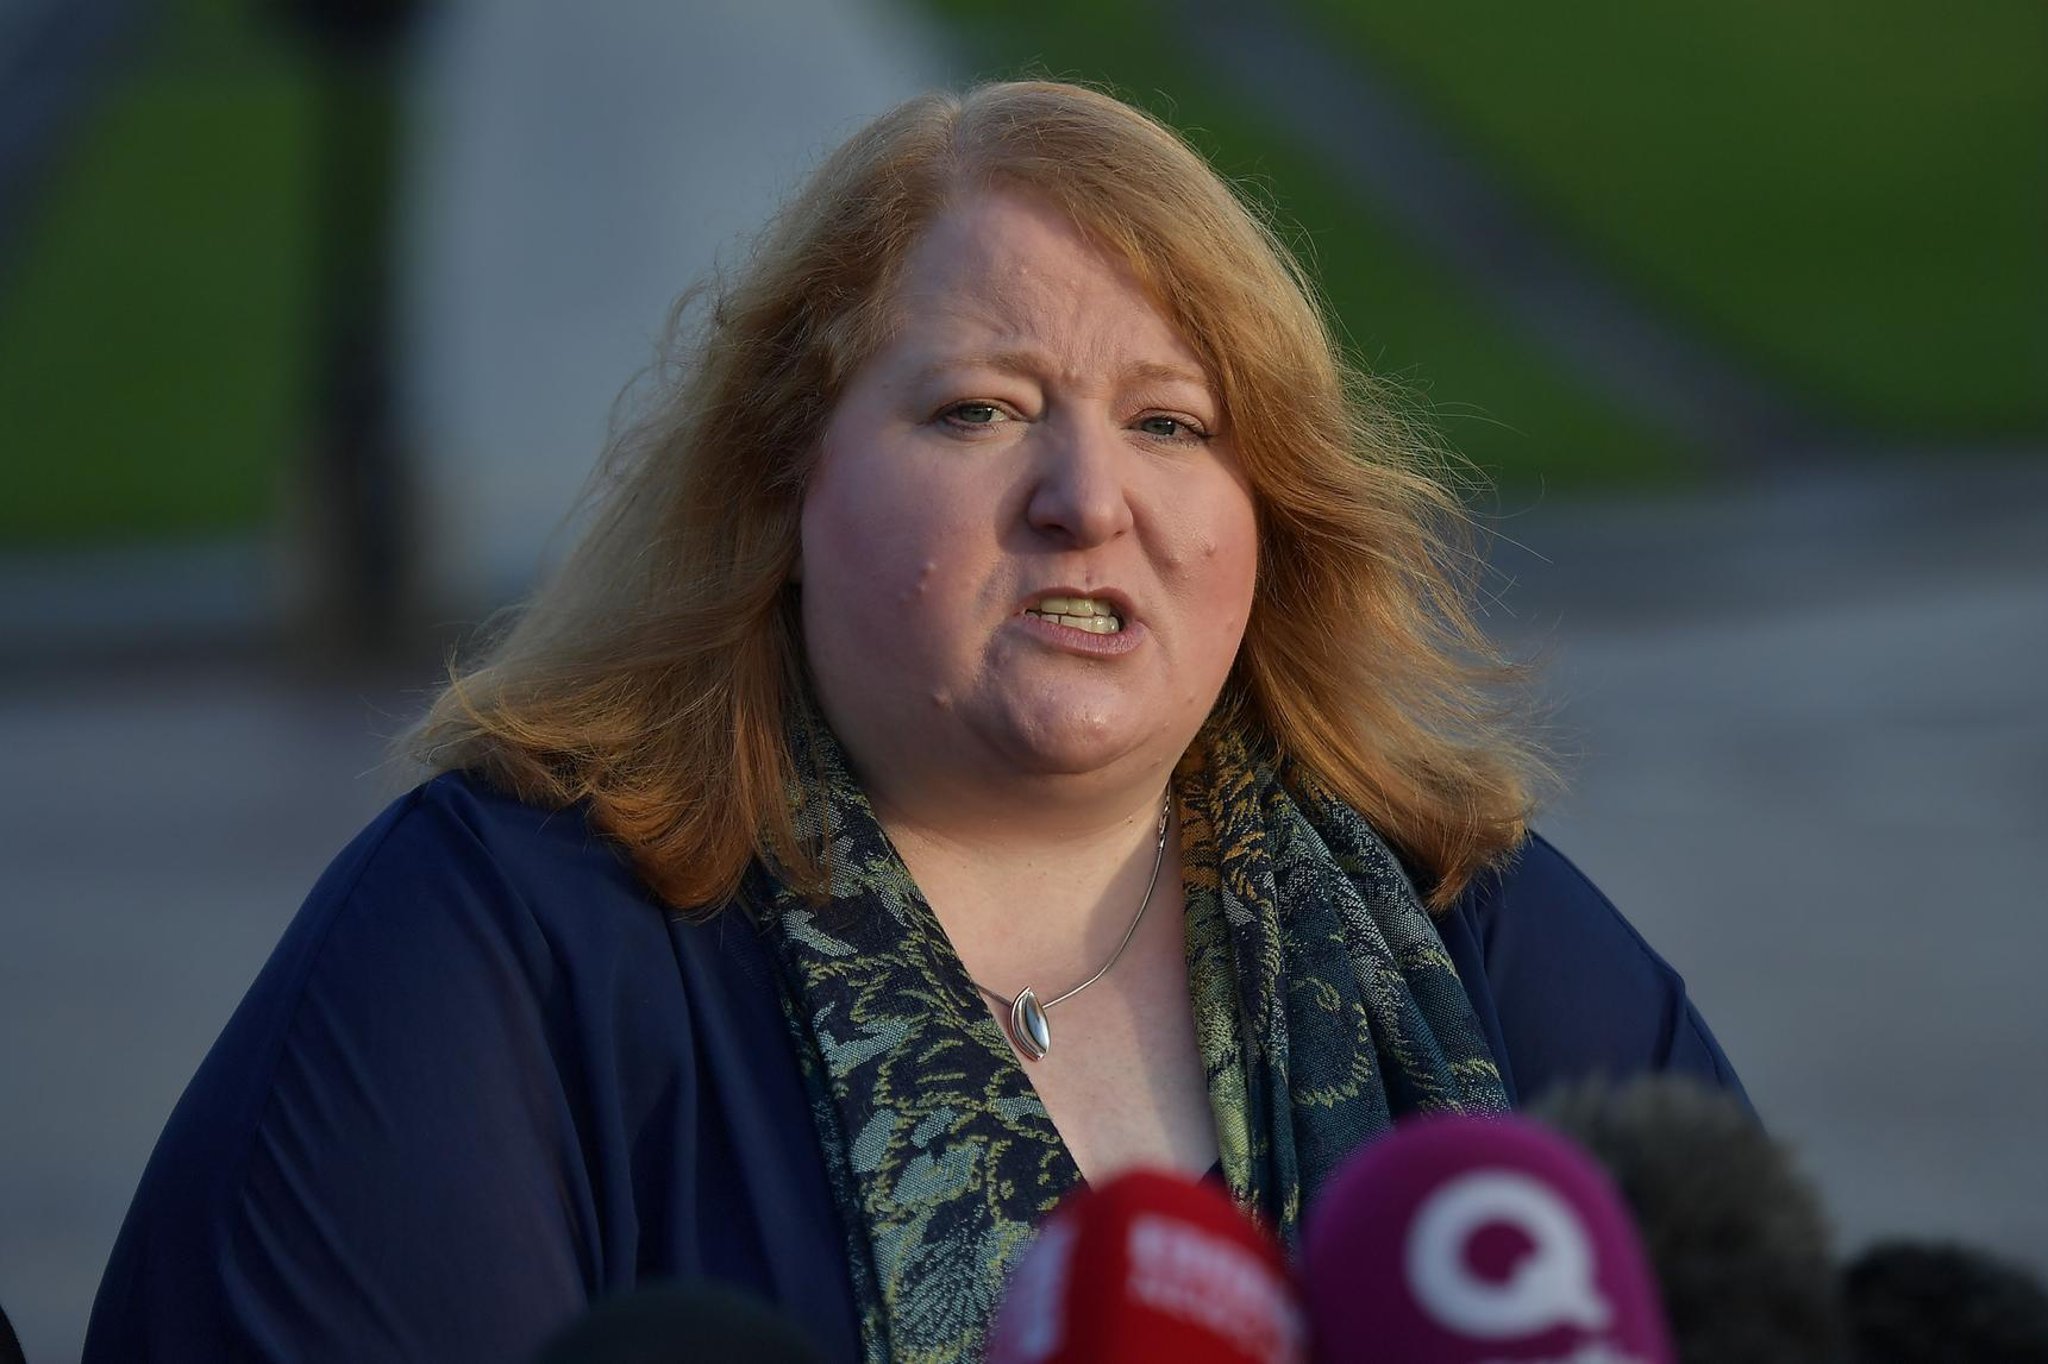 Now is the time to lead not leave government, Alliance leader Naomi Long said today